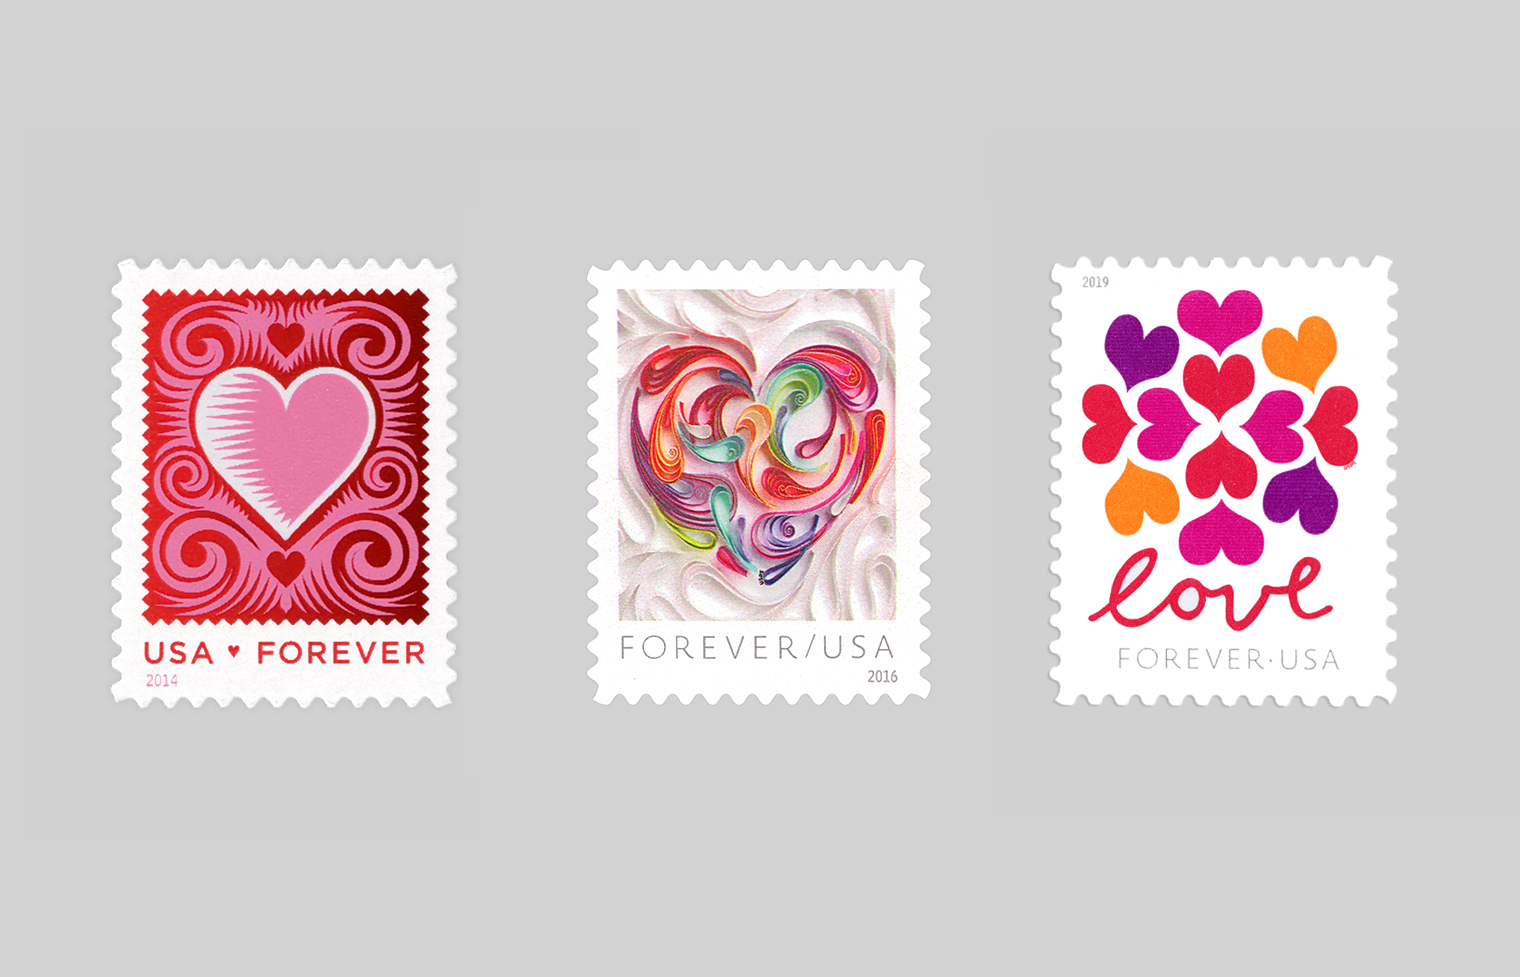 Paper Heart, Quilled Hearts, and Love Blossom stamps